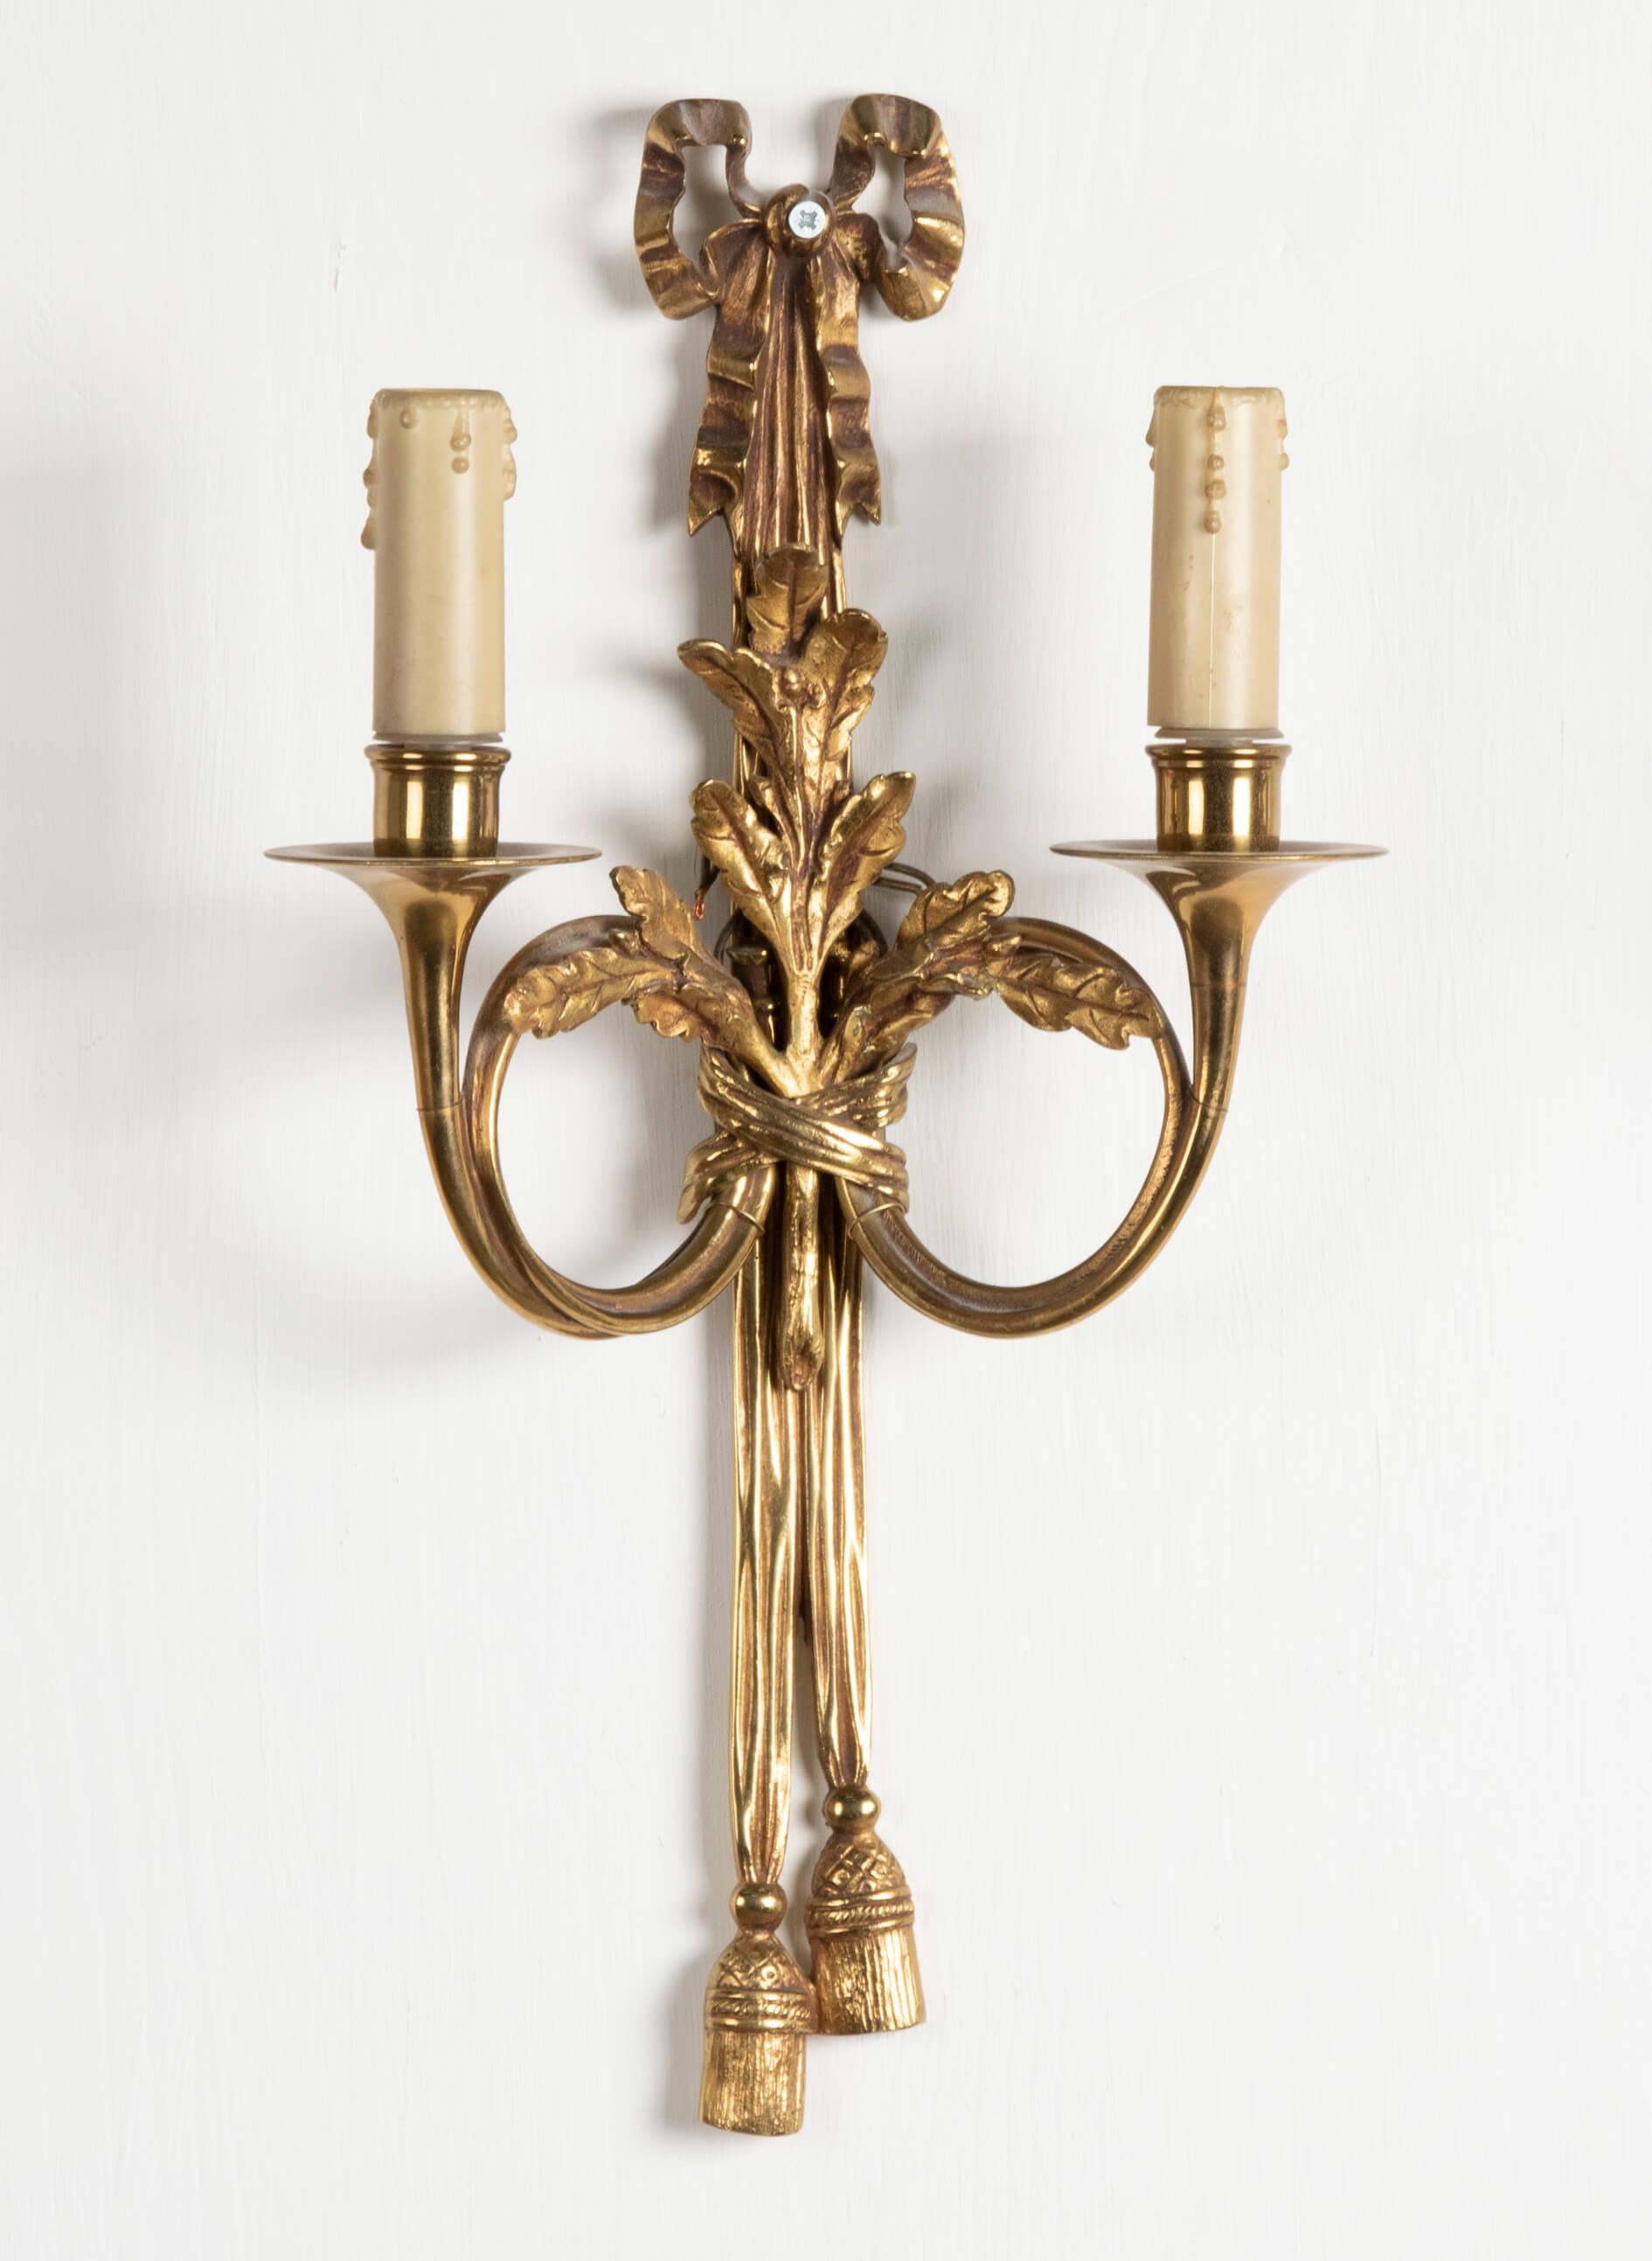 Pair of Louis XVI style gilt bronze wall lights with two light branches, in the matter of Claude Galle. Decorated with ribbon bows, lace trimmings and oak tree branches, both light branches shaped as horns. This wall lamps are made in France, about